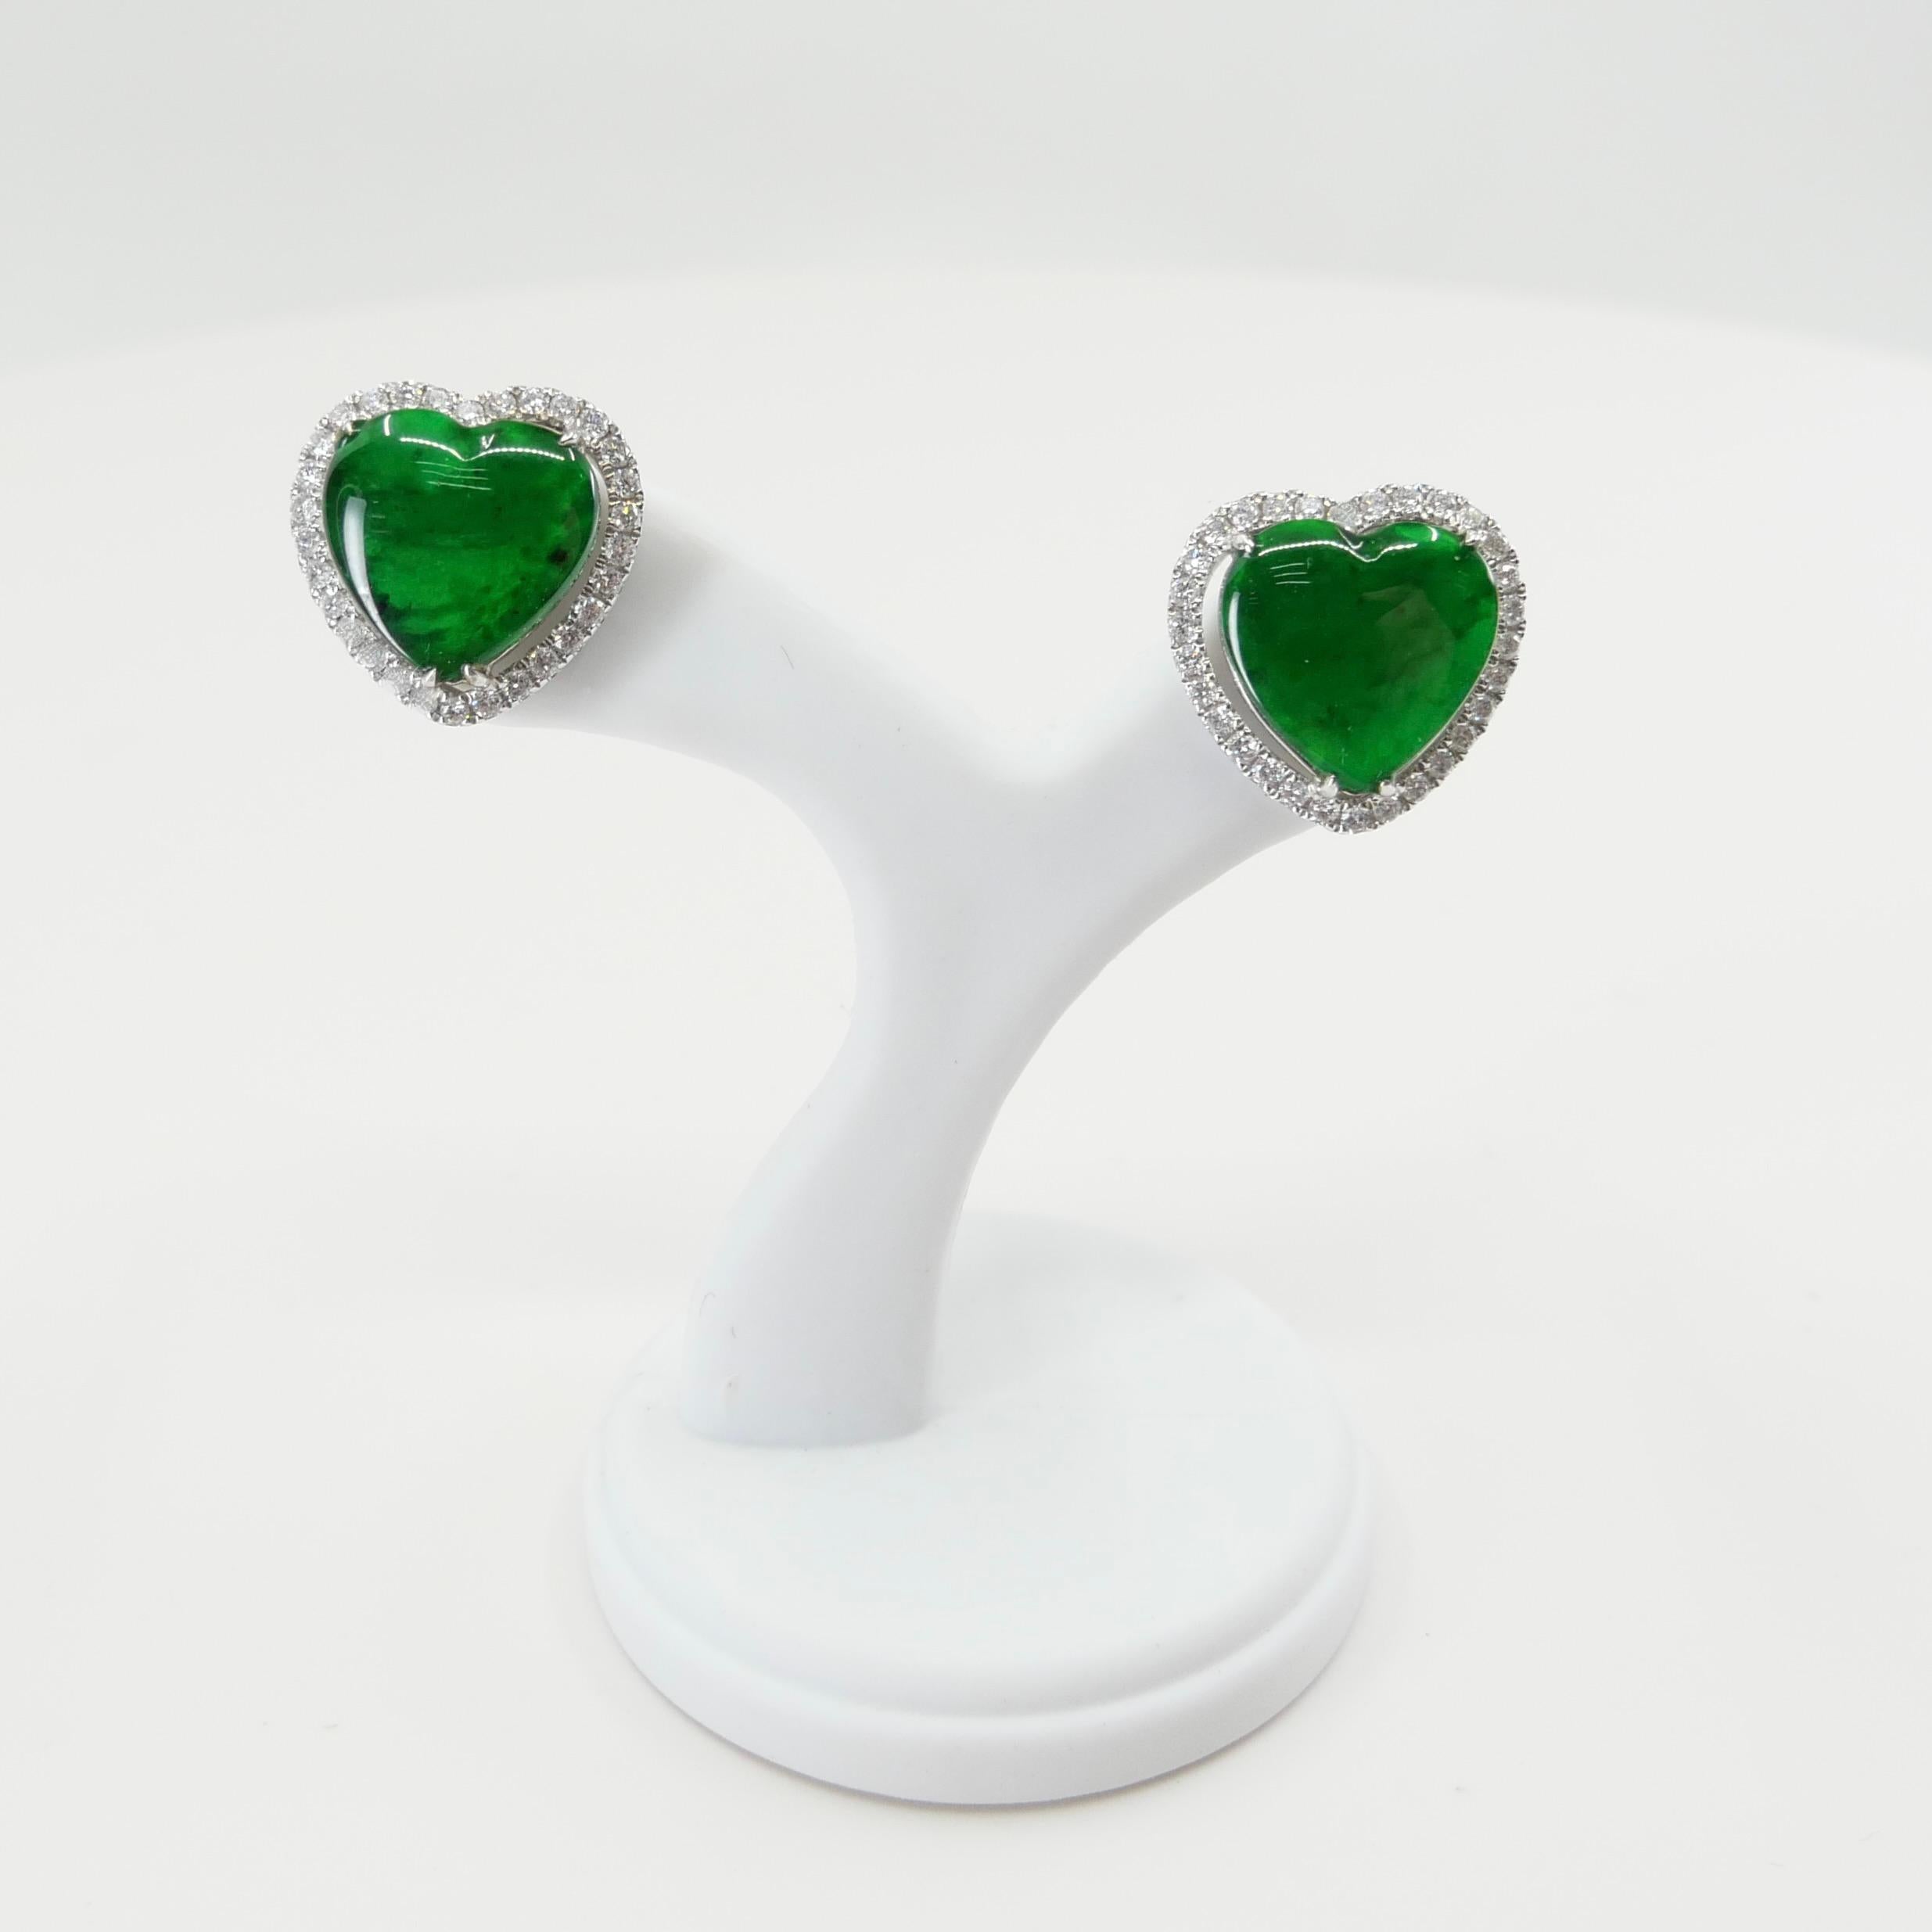 Heart Cut Certified Type A Jadeite and Diamond Earrings Imperial Jade, Spinach Green Color